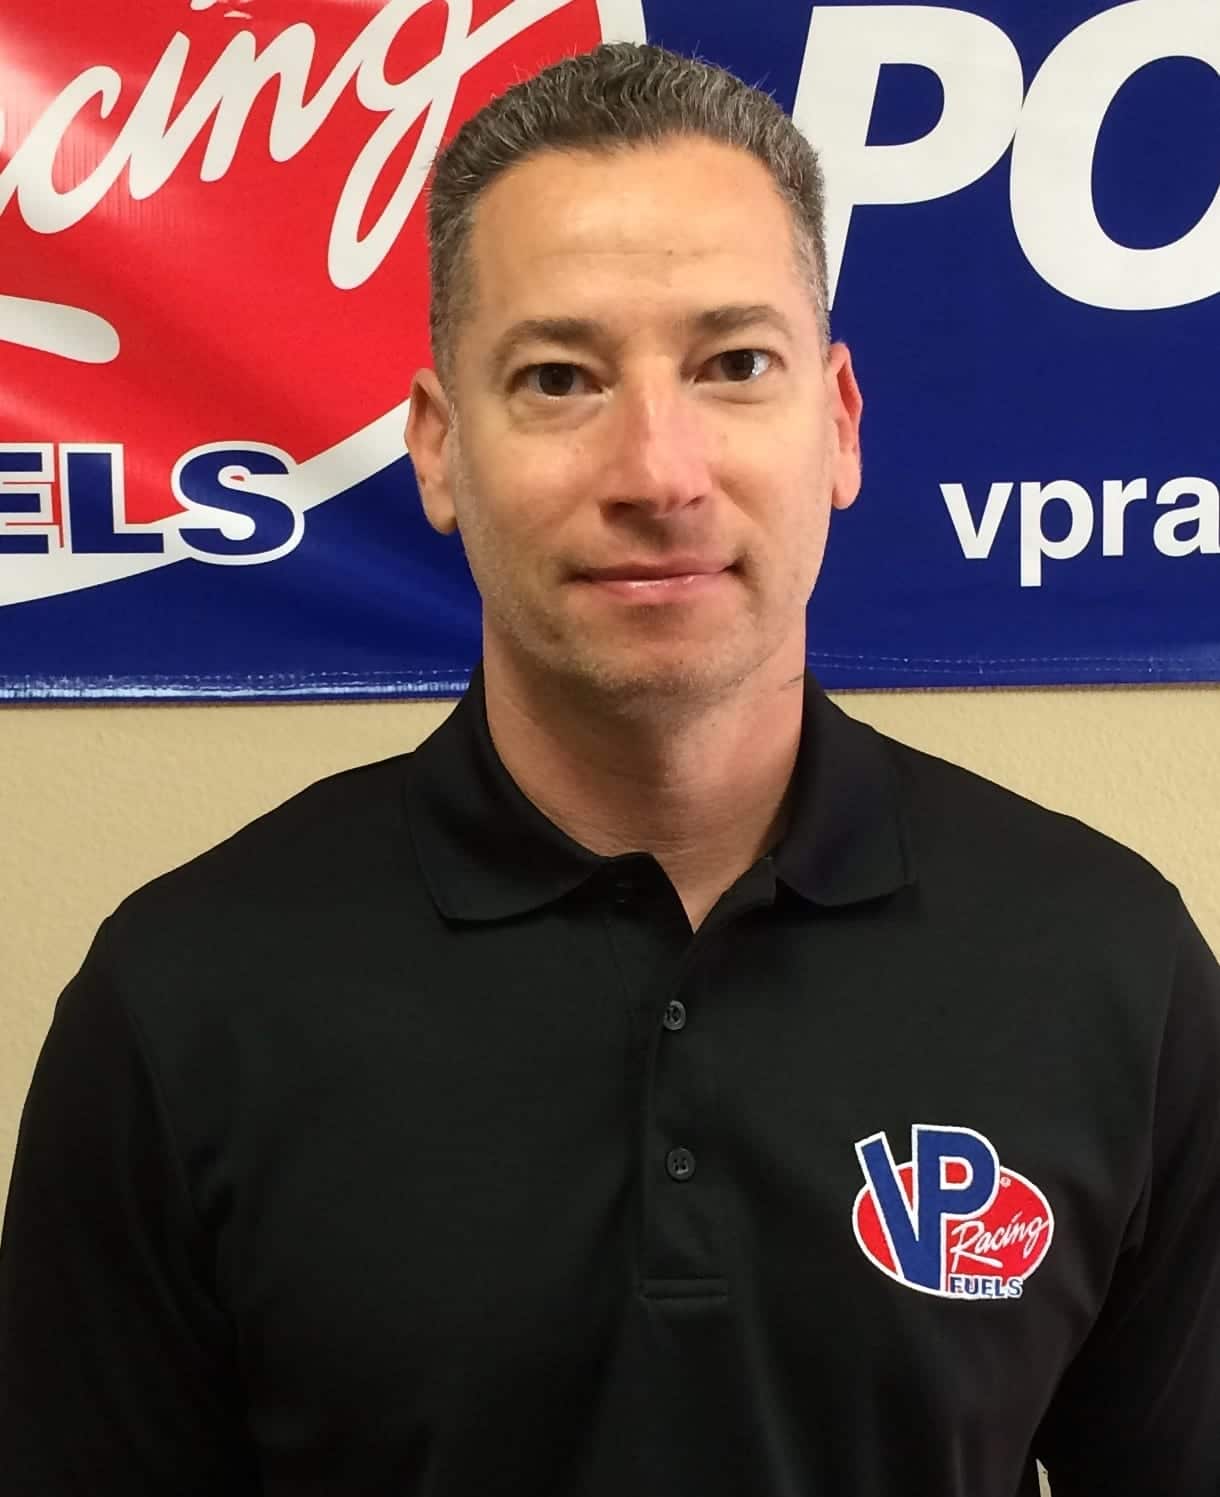 VP RACING FUELS APPOINTS GARY JAIMAN AS WHOLESALE BRAND MANAGER FOR WESTERN REGION   